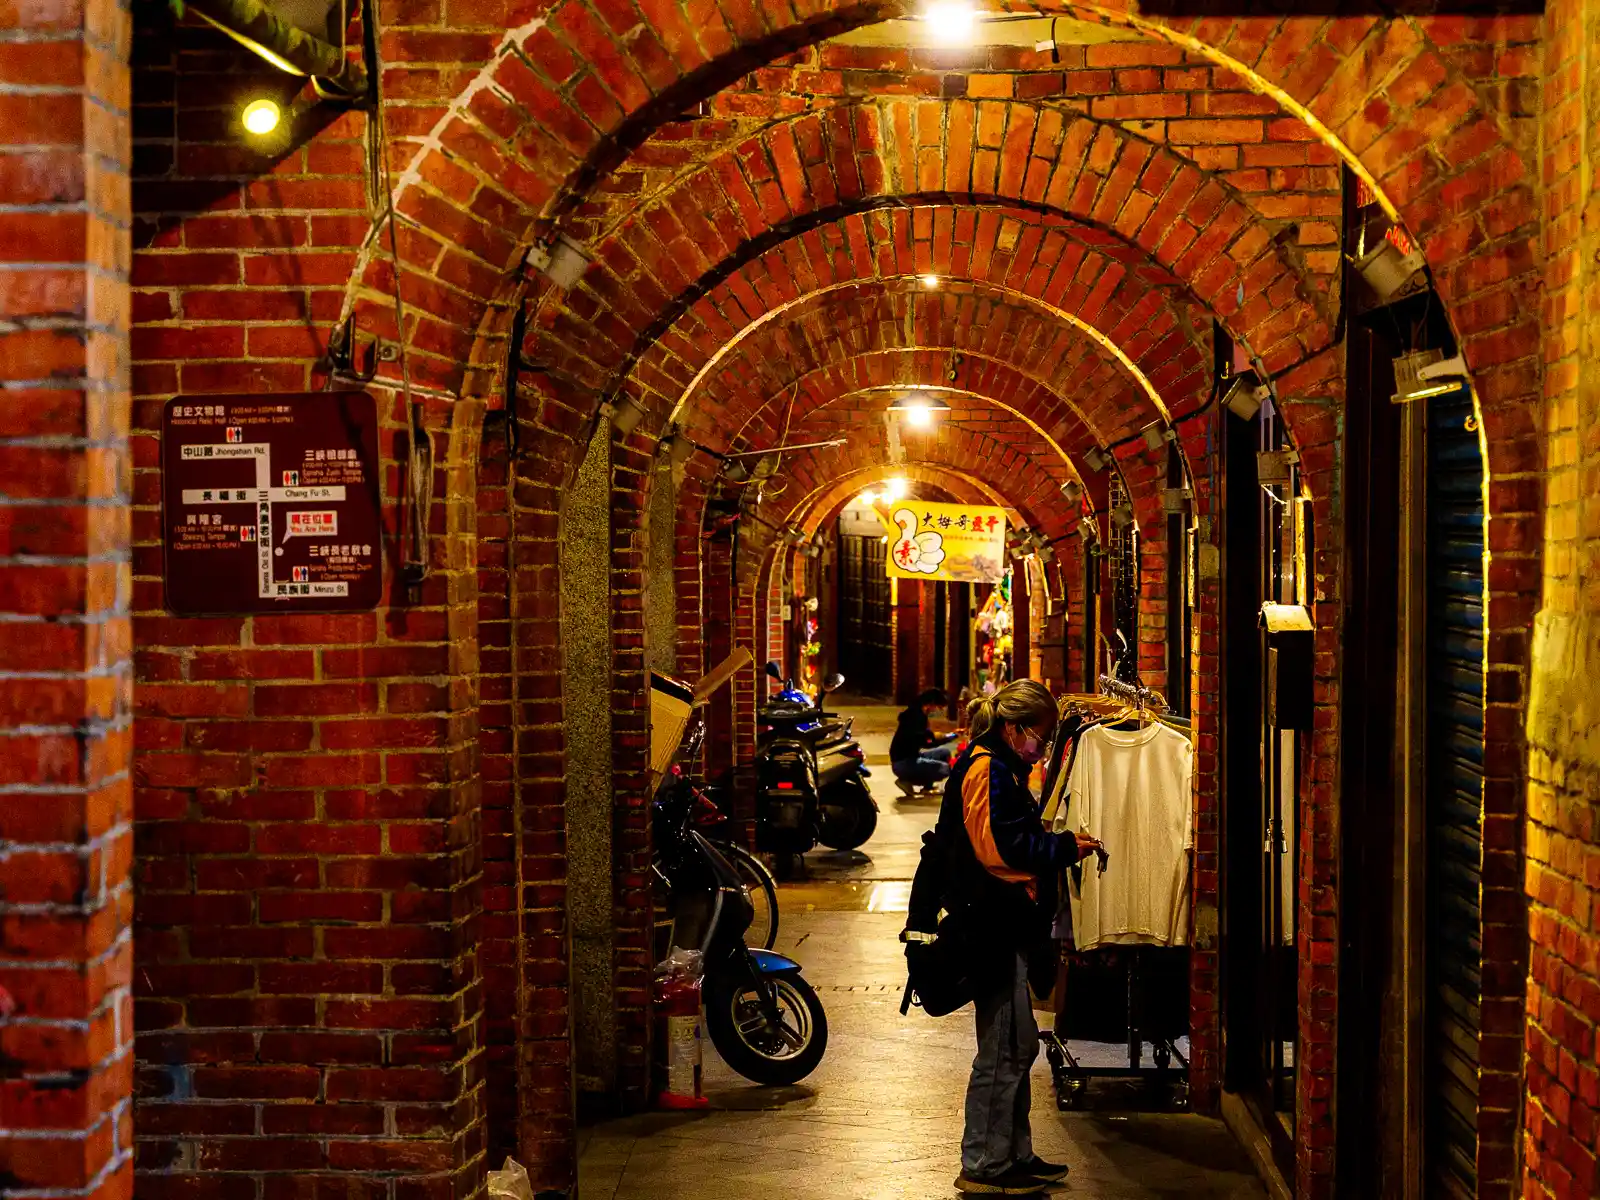 Consecutive red-brick archways reinforce the arcade on Sanxia Old Street.